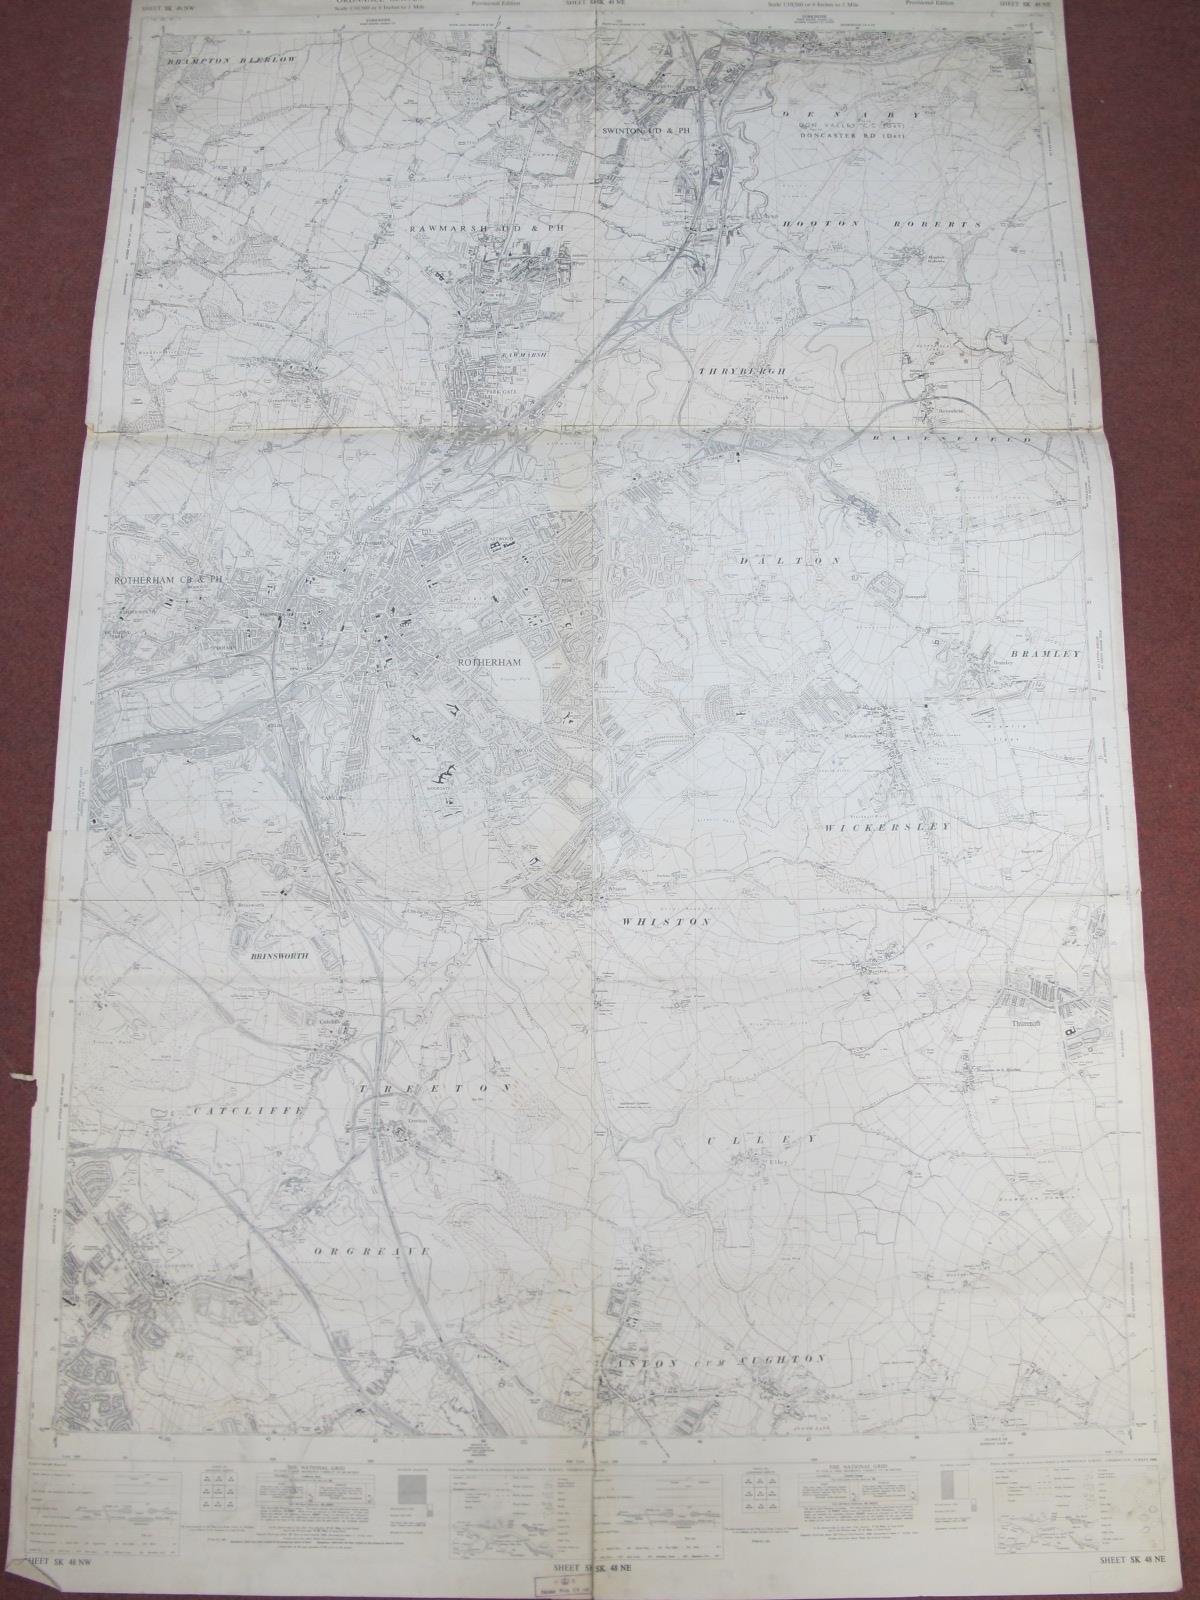 West Riding Yorkshire Maps, Rotherham and area - some dates noted 1902, 1903, 1922, 1935, various